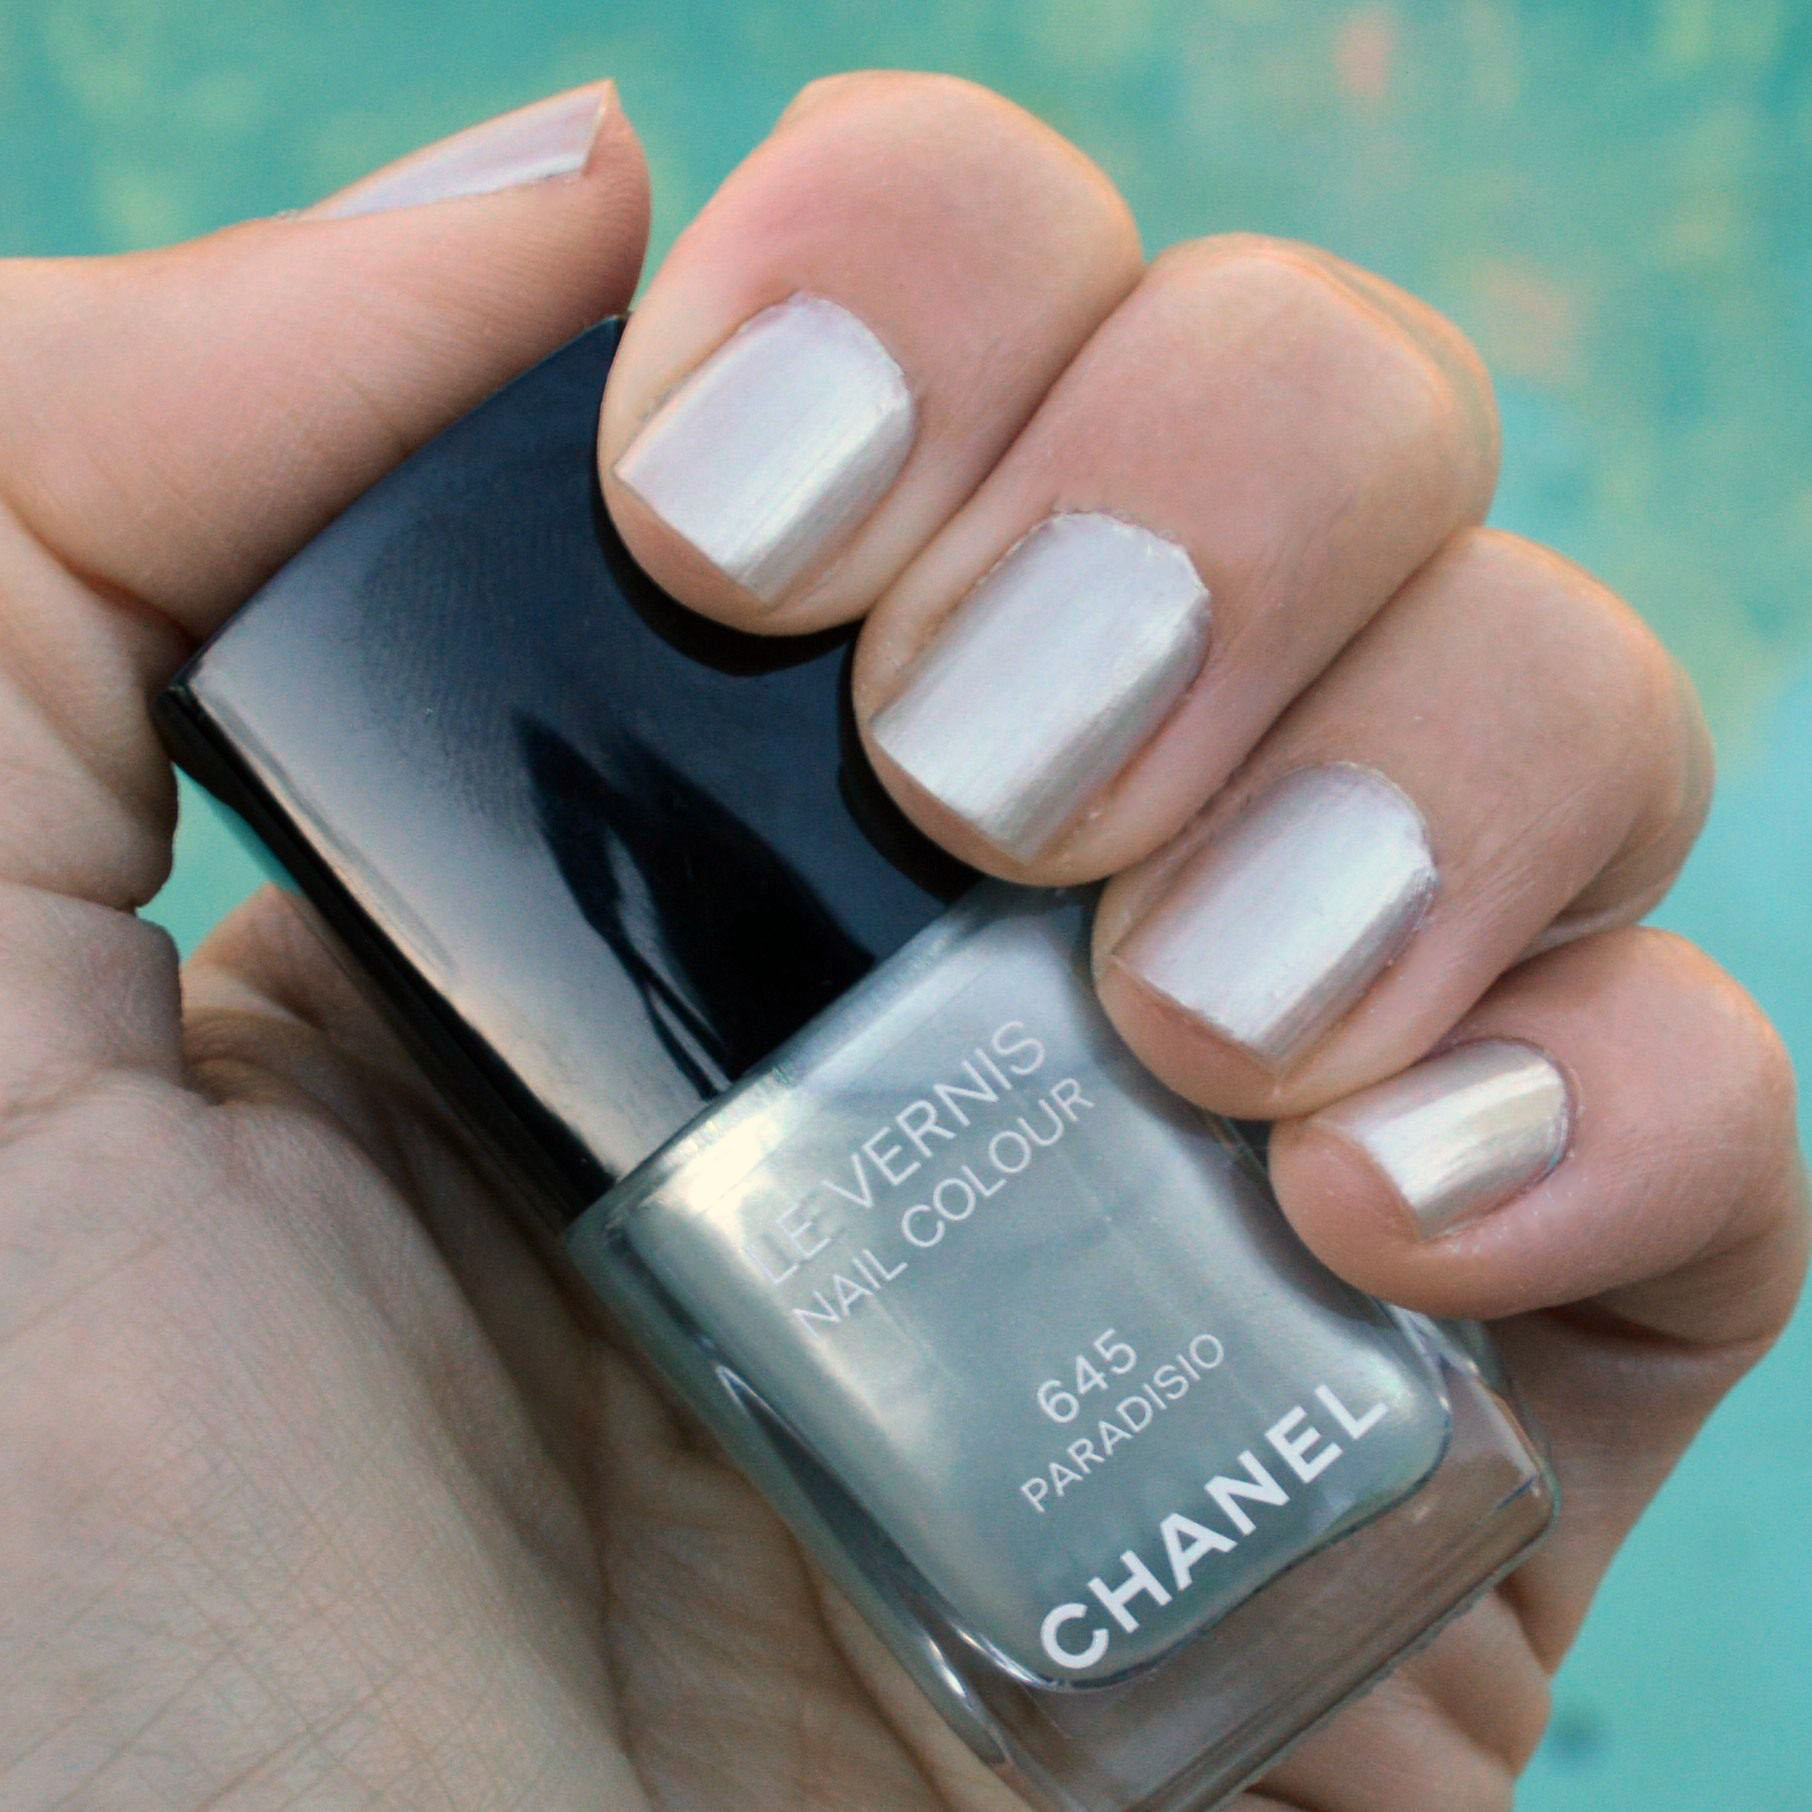 Pictured : Chanel Paradisio nail polish for spring 2015. One base coat ...